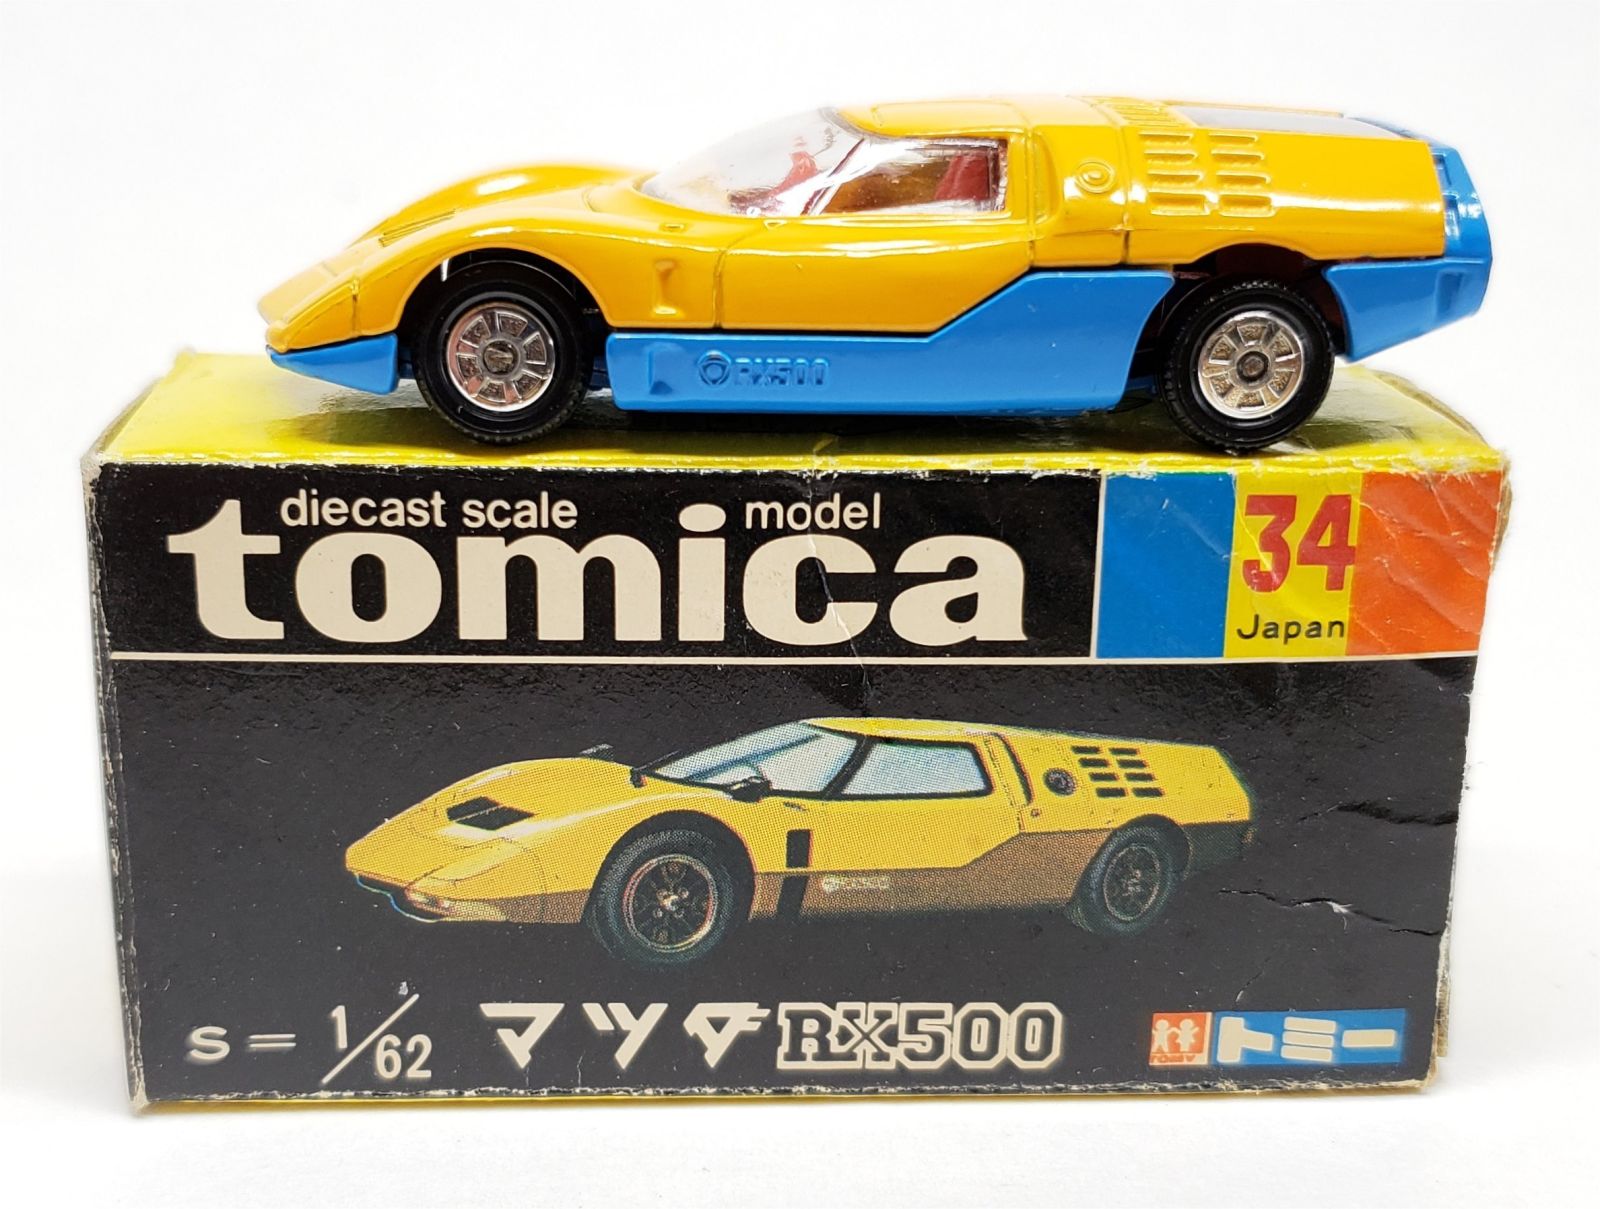 Illustration for article titled [REVIEW] Tomica Mazda RX-500